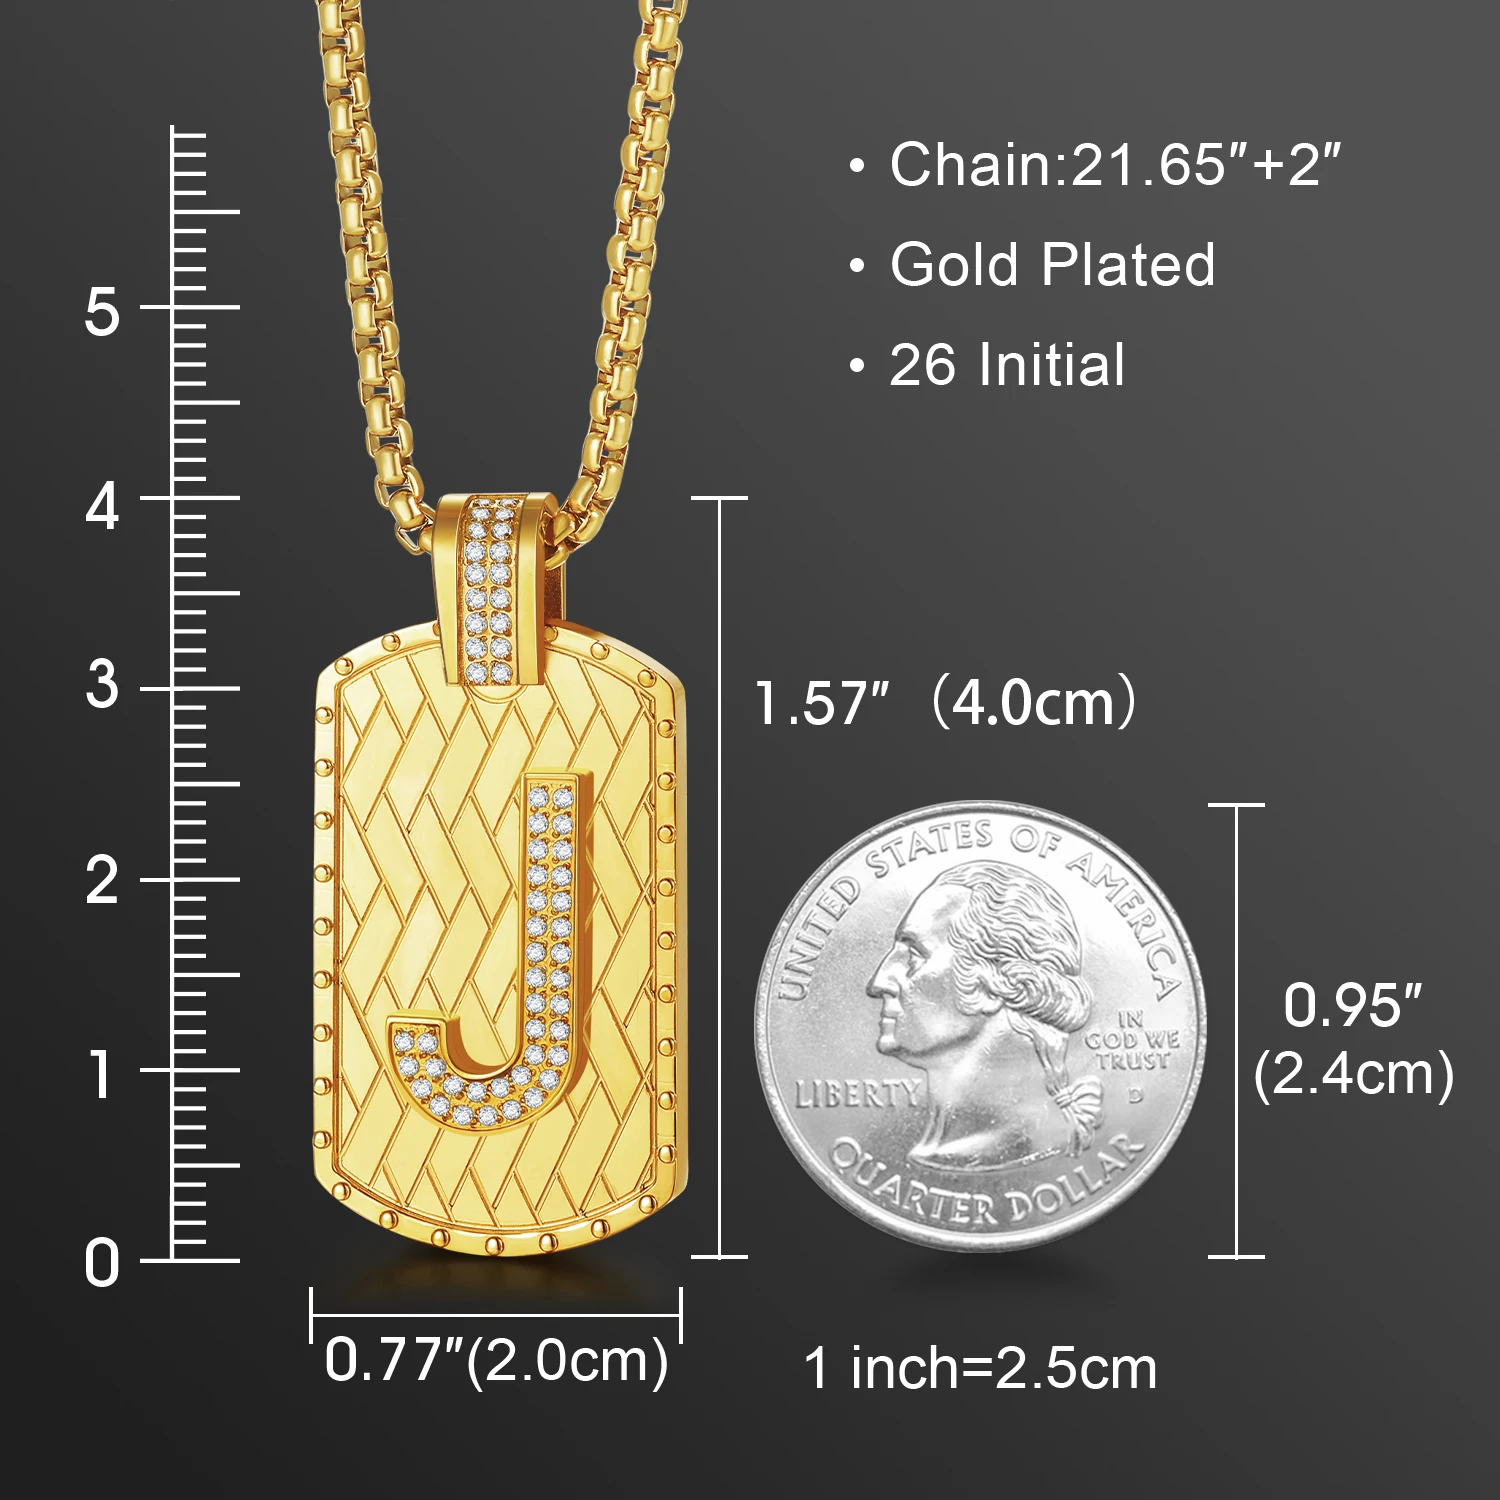 CDE P1071 Fashion Brass Jewelry Copper Alloy Zircon Necklace Wholesale Gold Plated Letter Pendant Necklace For Gift